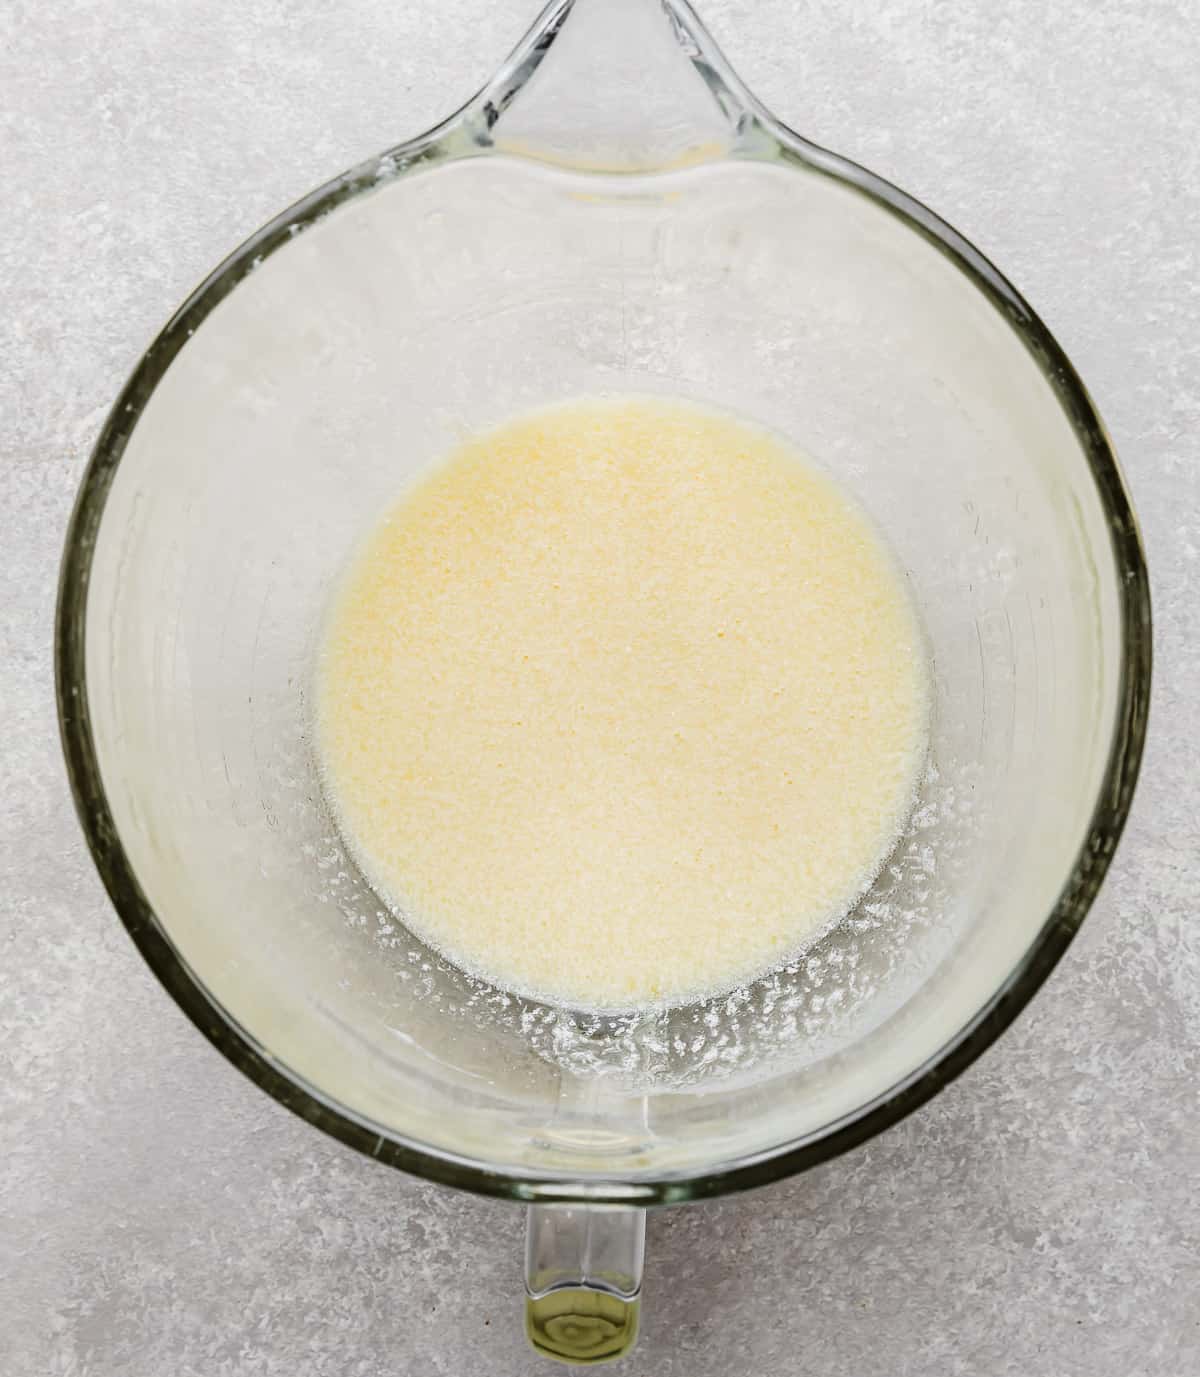 A light yellow colored liquid in a glass stand mixer bowl on a gray background.